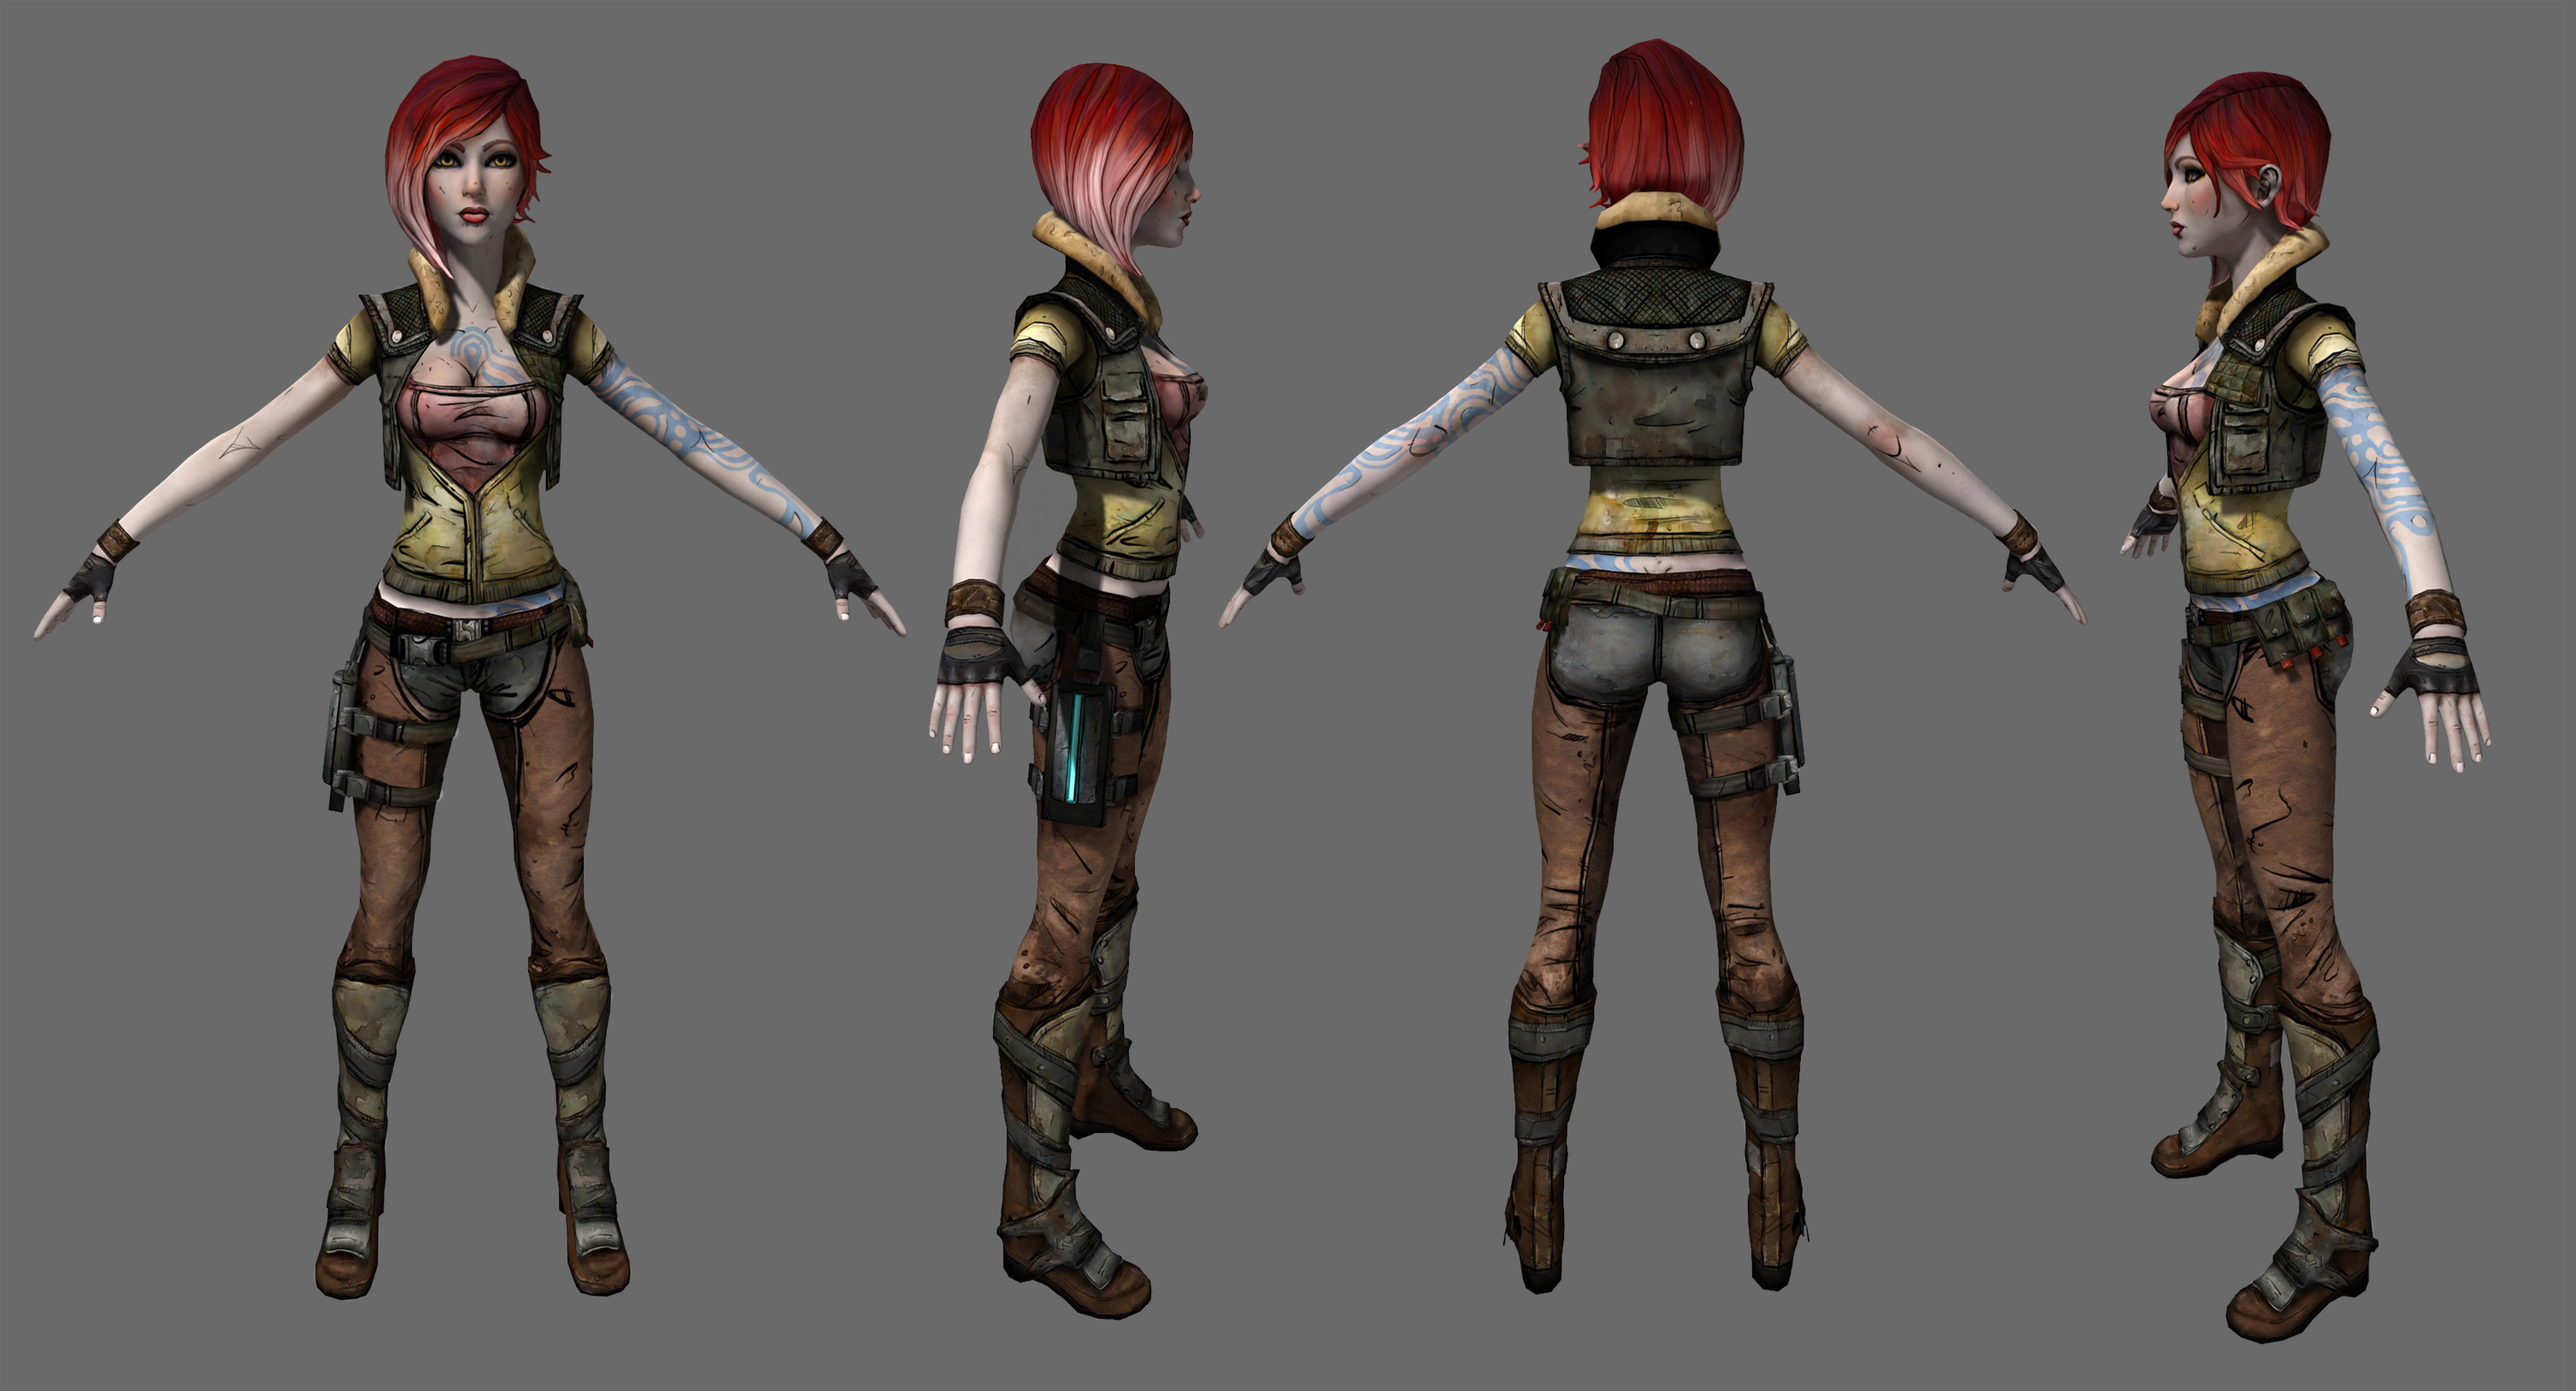 Details about   Borderlands 3 Lilith Cosplay Costume Suit Halloween Uniform Outfit Dress 